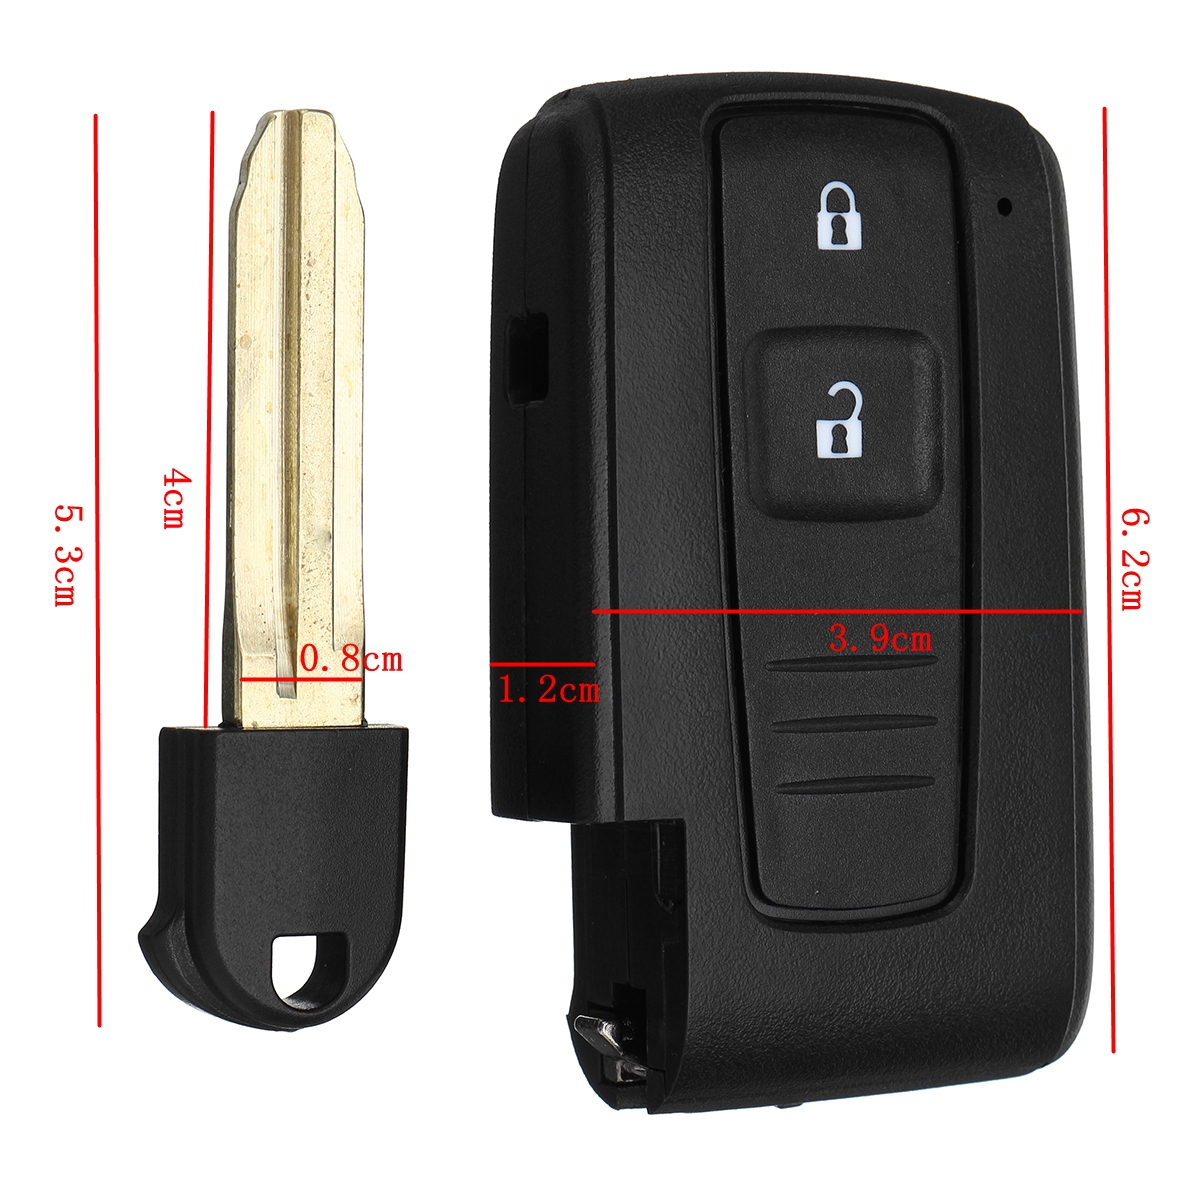 Car-Remote-Key-Fob-Case-With-Uncut-Blade-Battery-Kits-For-Toyota-Corolla-Verso-Prius-1261446